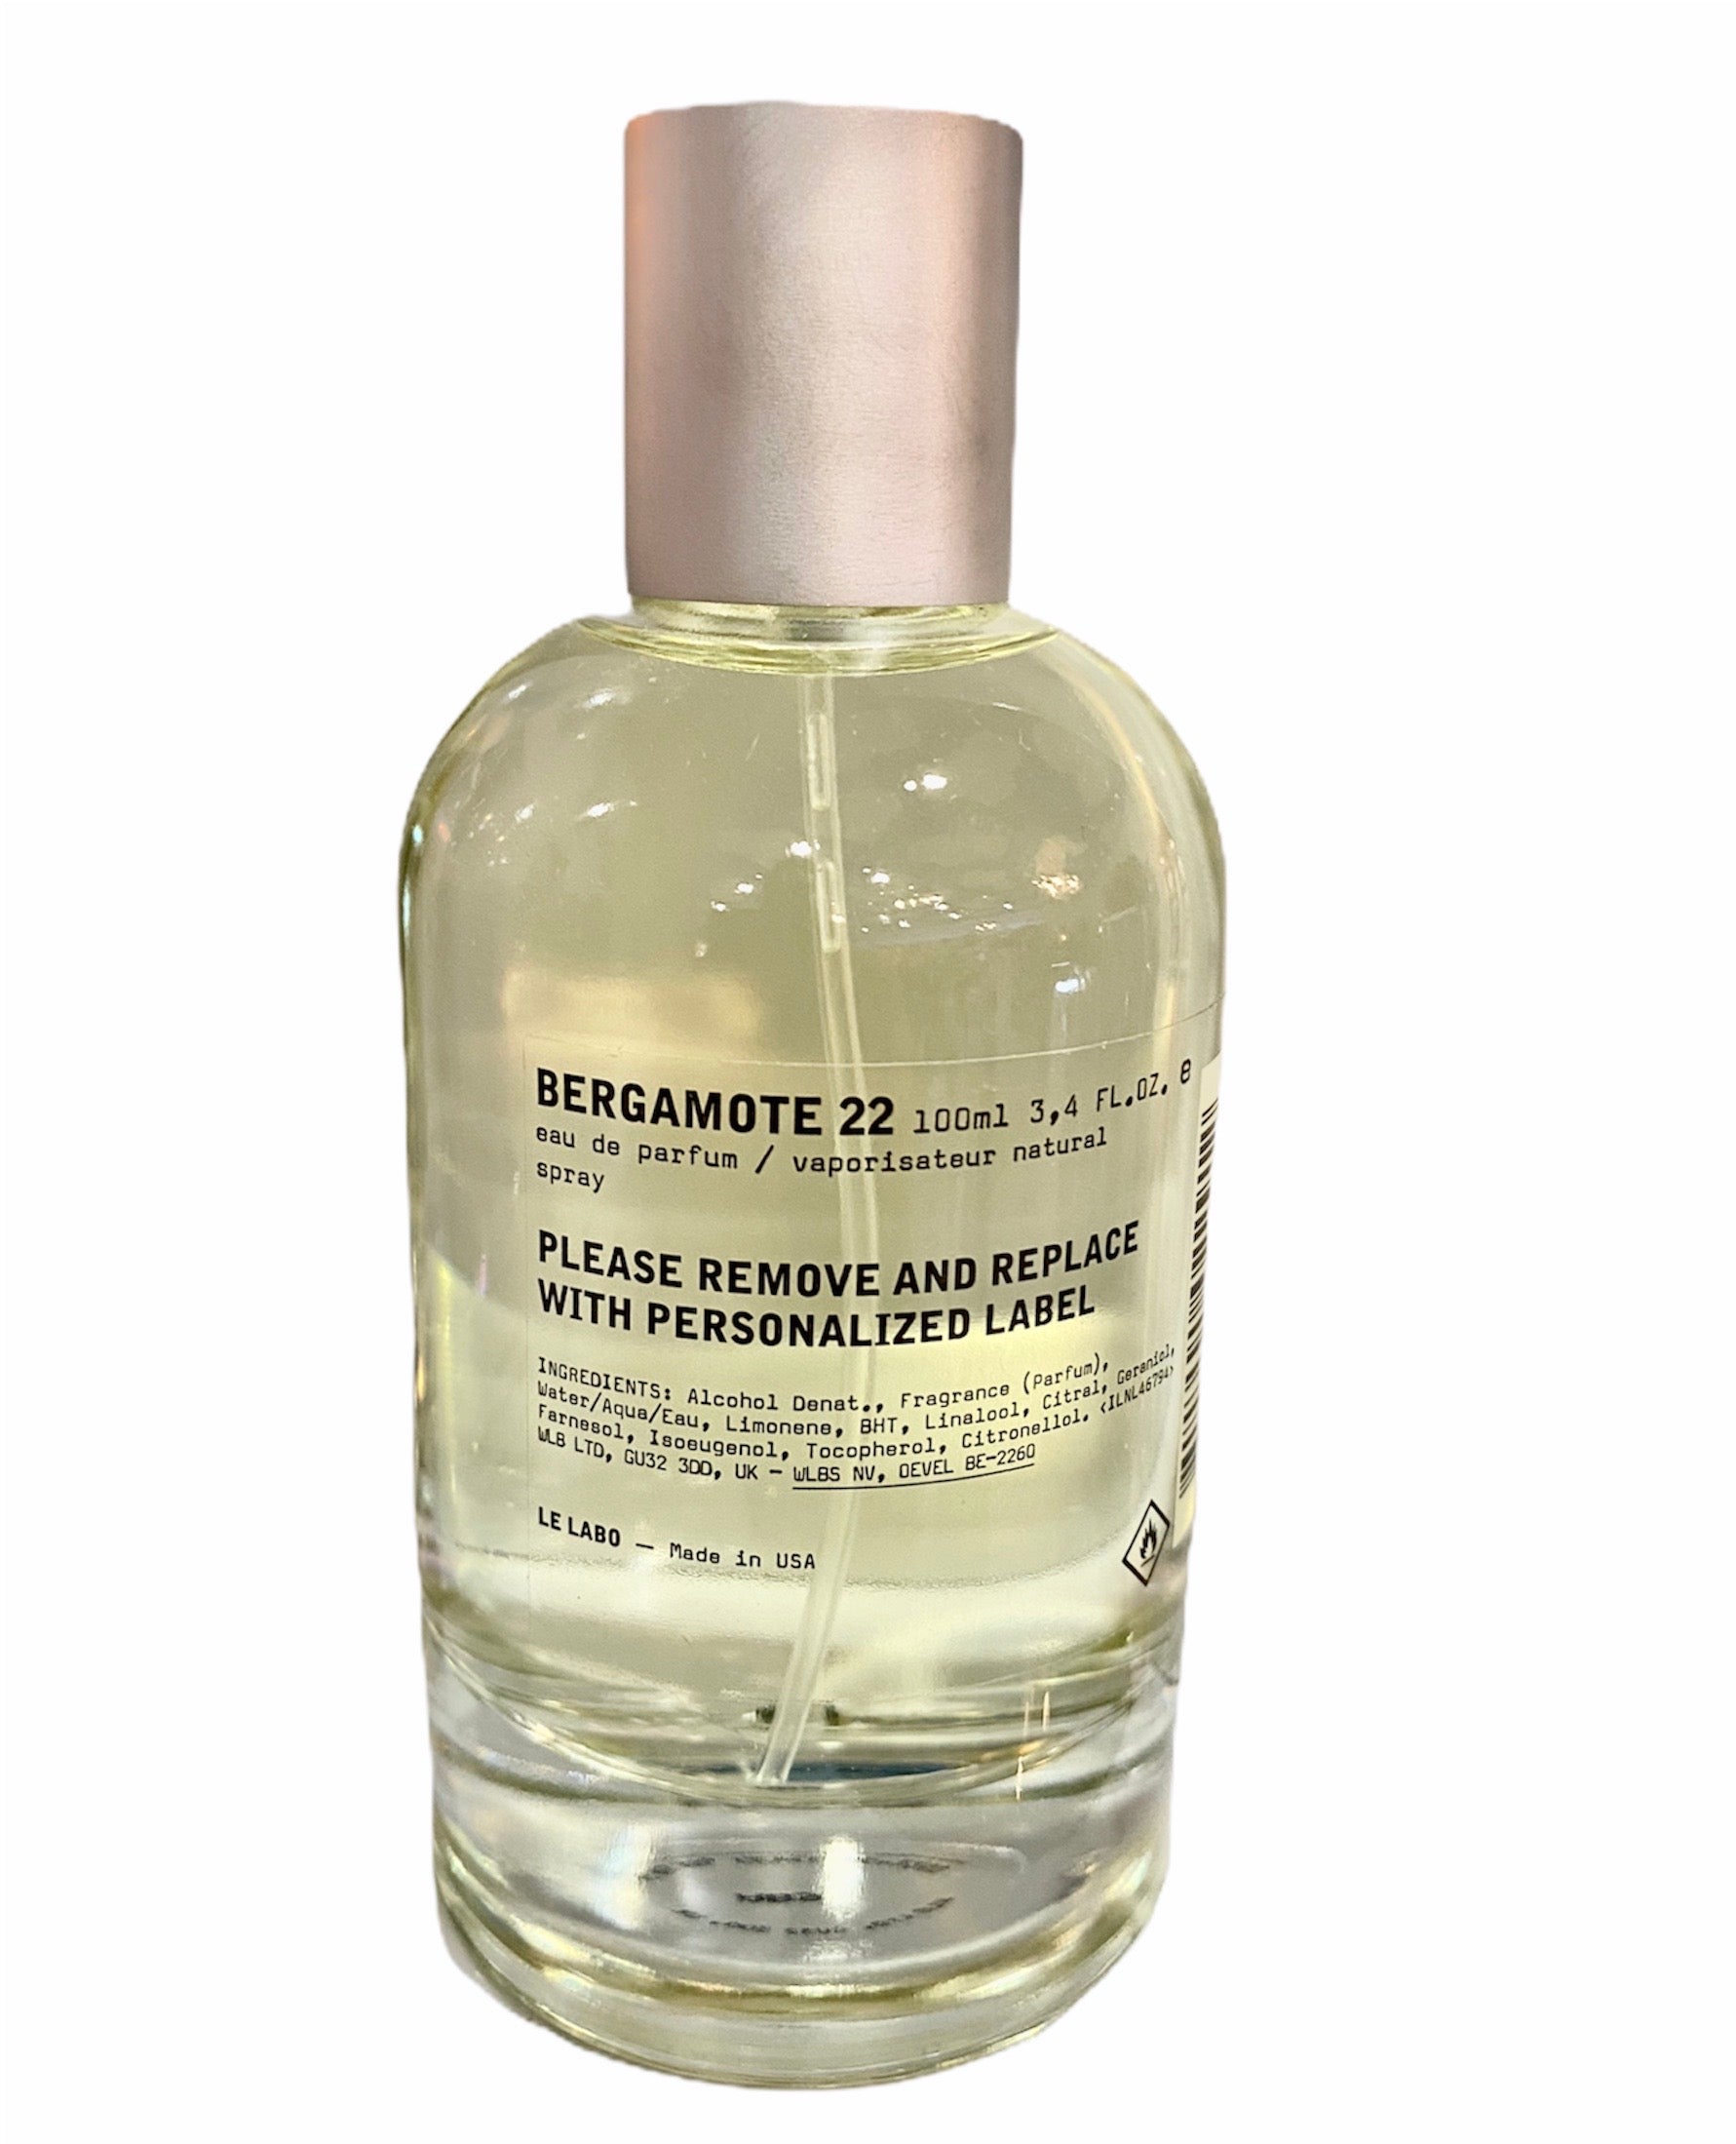 BERGAMOTE 22 perfume 3.4oz Le Labo spray (unboxed) – always special & gifts